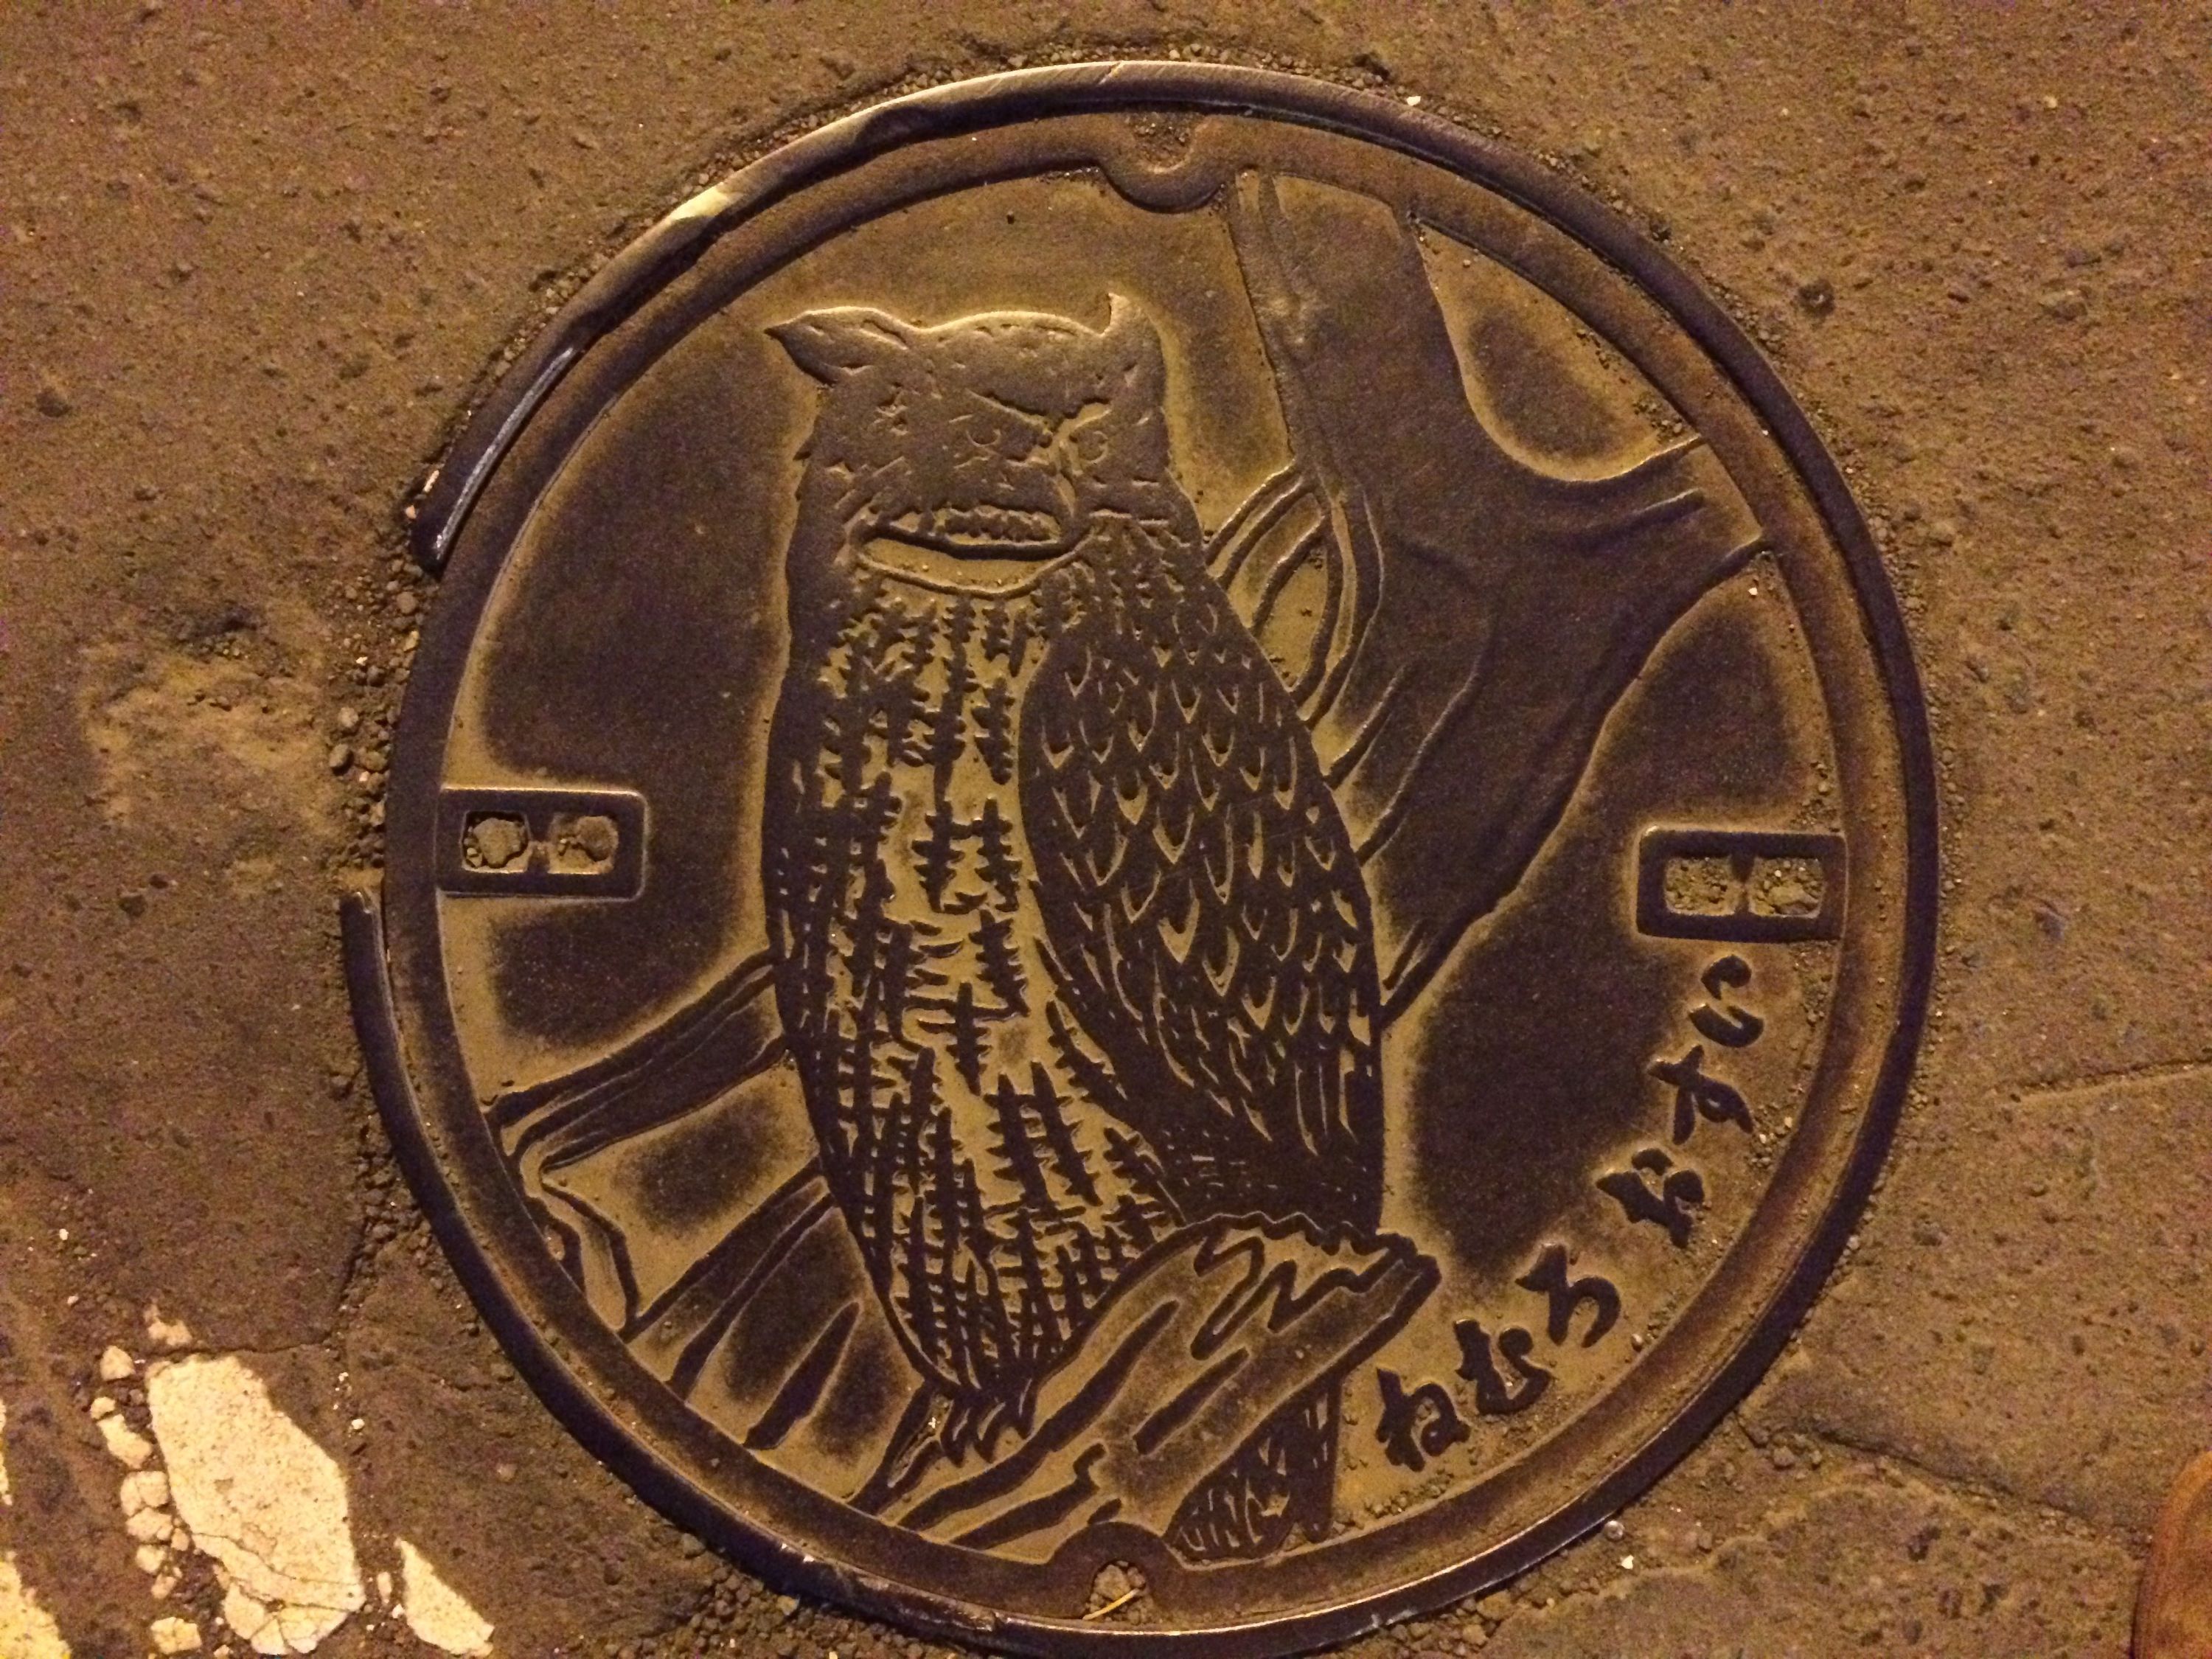 A manhole covered decorated with a Blakiston’s fish owl, the largest owl in the world.